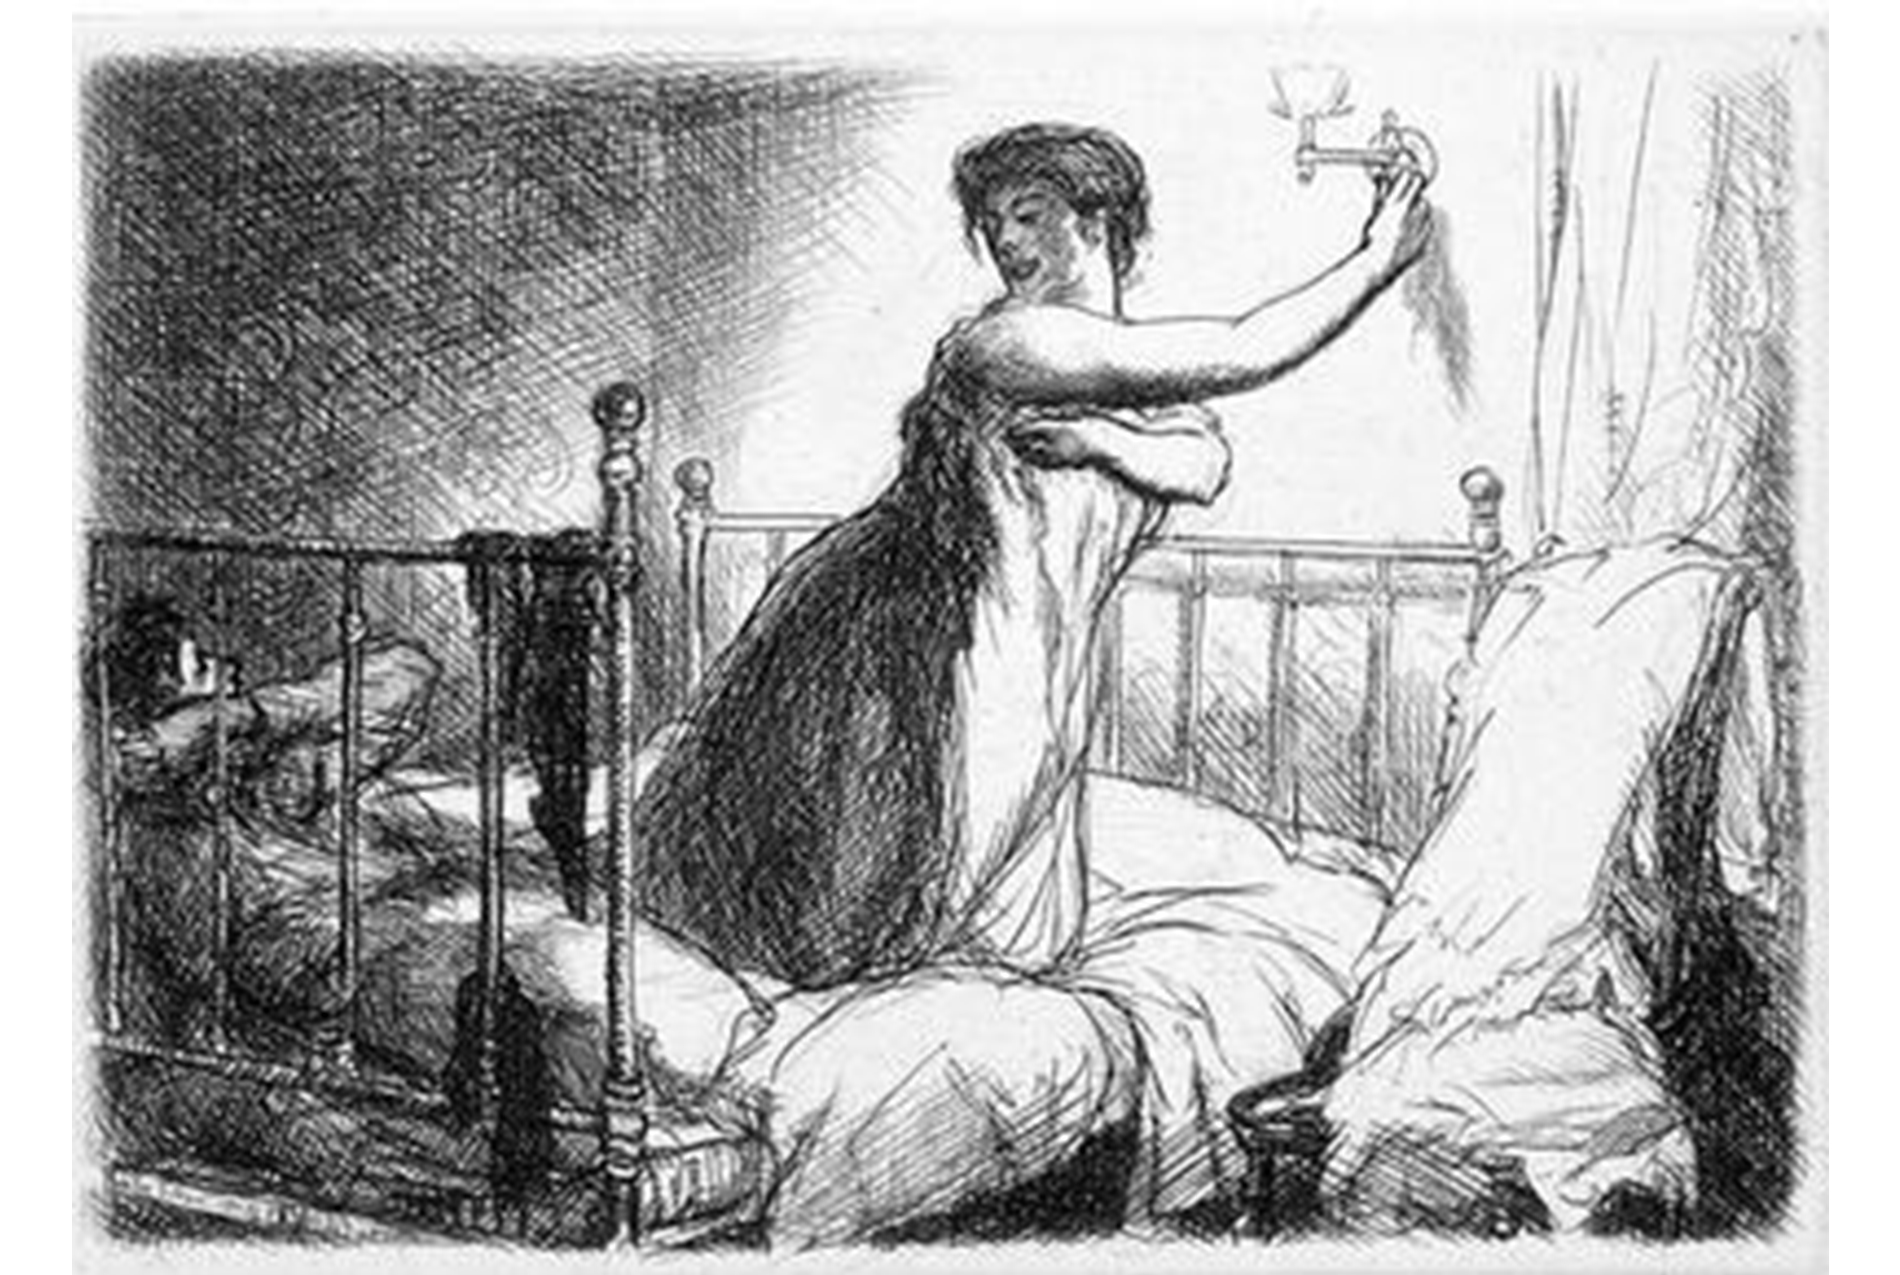 woman kneels on a bed, reaching up and behind her to turn out the light